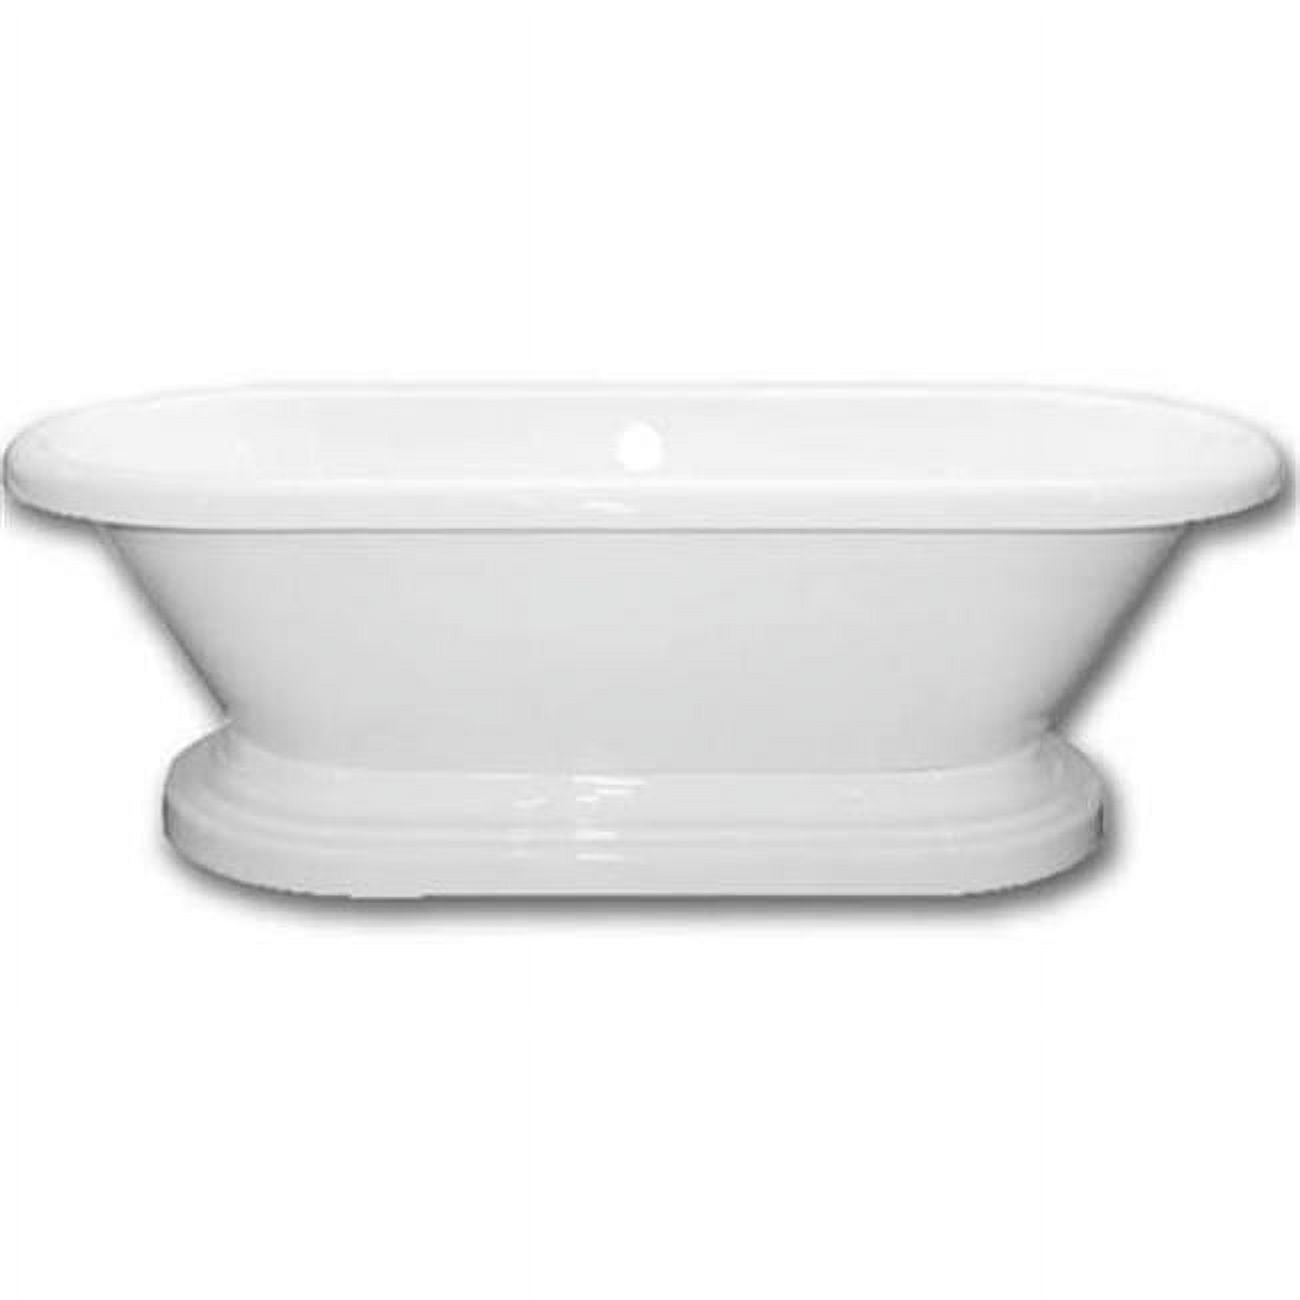 Ade60-ped-nh 60 X 30 In. Acrylic Double Ended Pedestal Bathtub With No Faucet Drillings